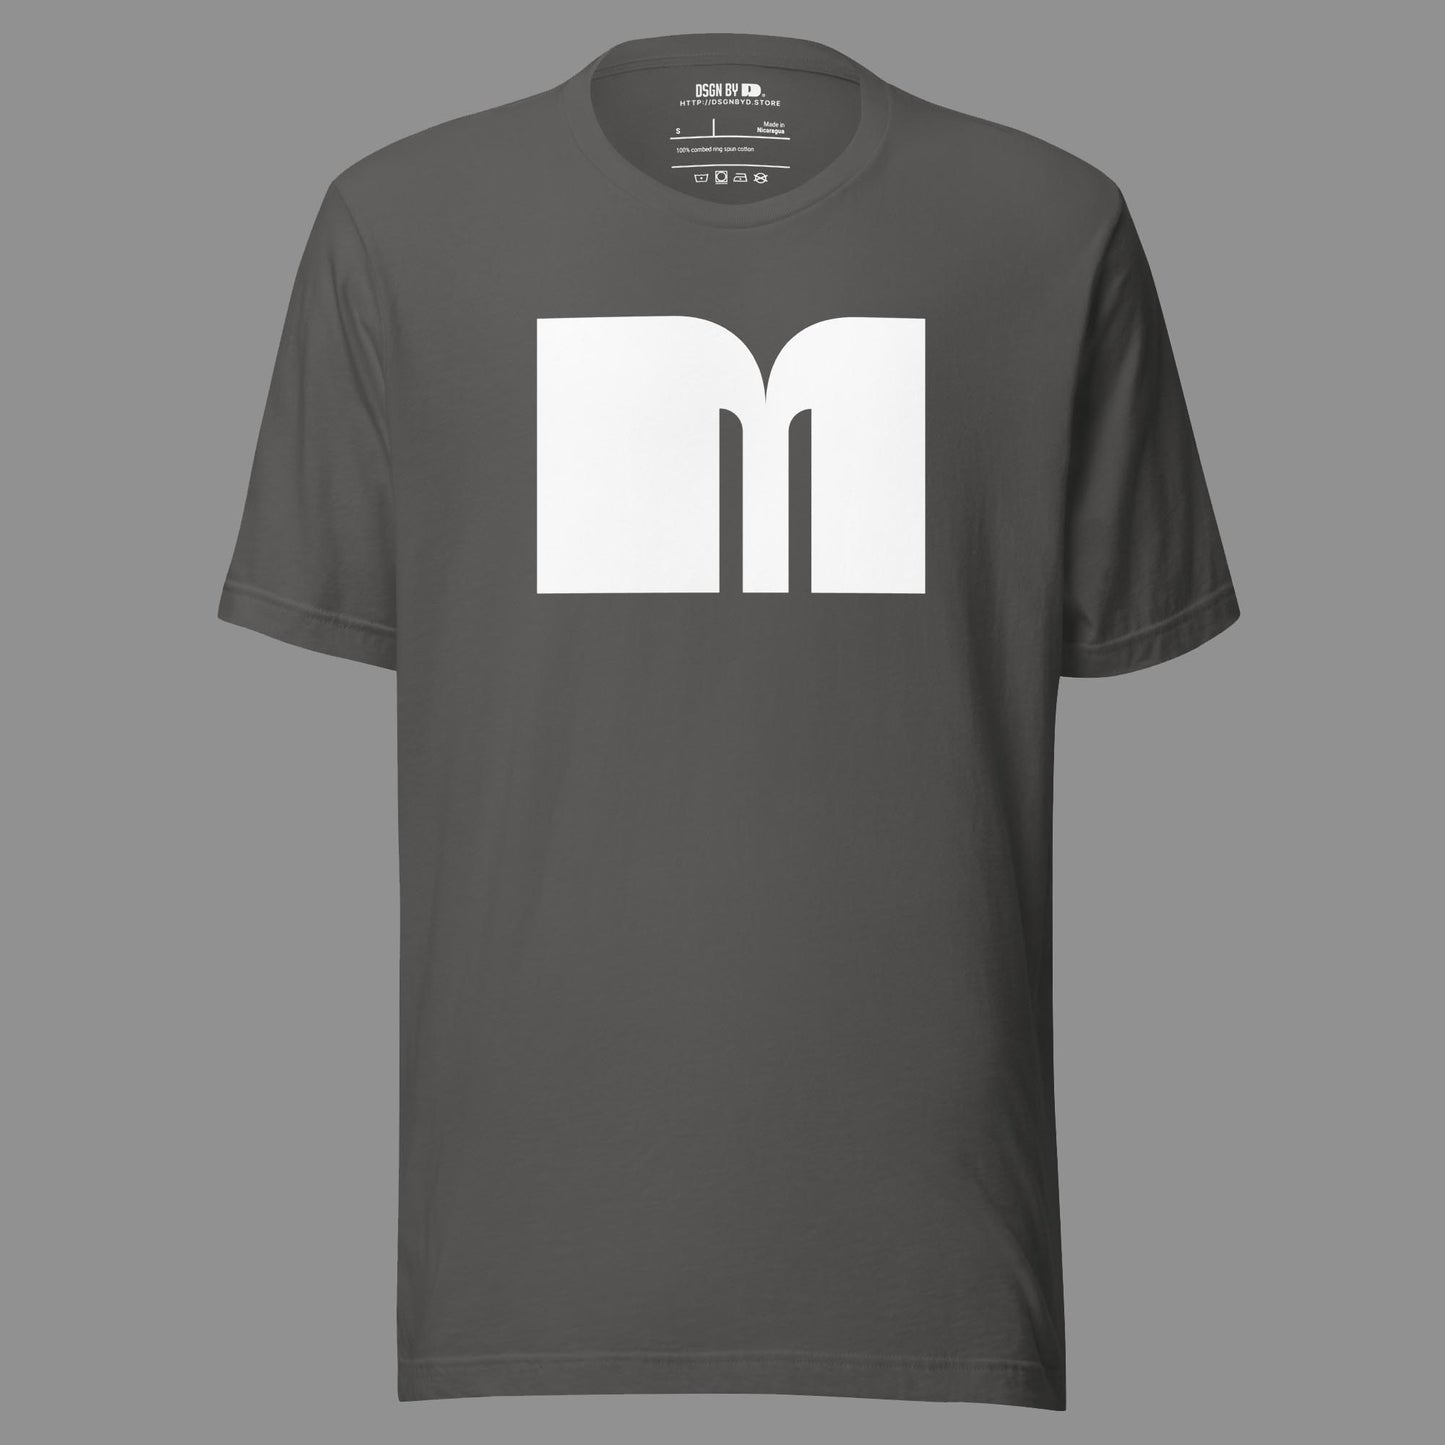 A grey cotton unisex graphic tee with letter M.